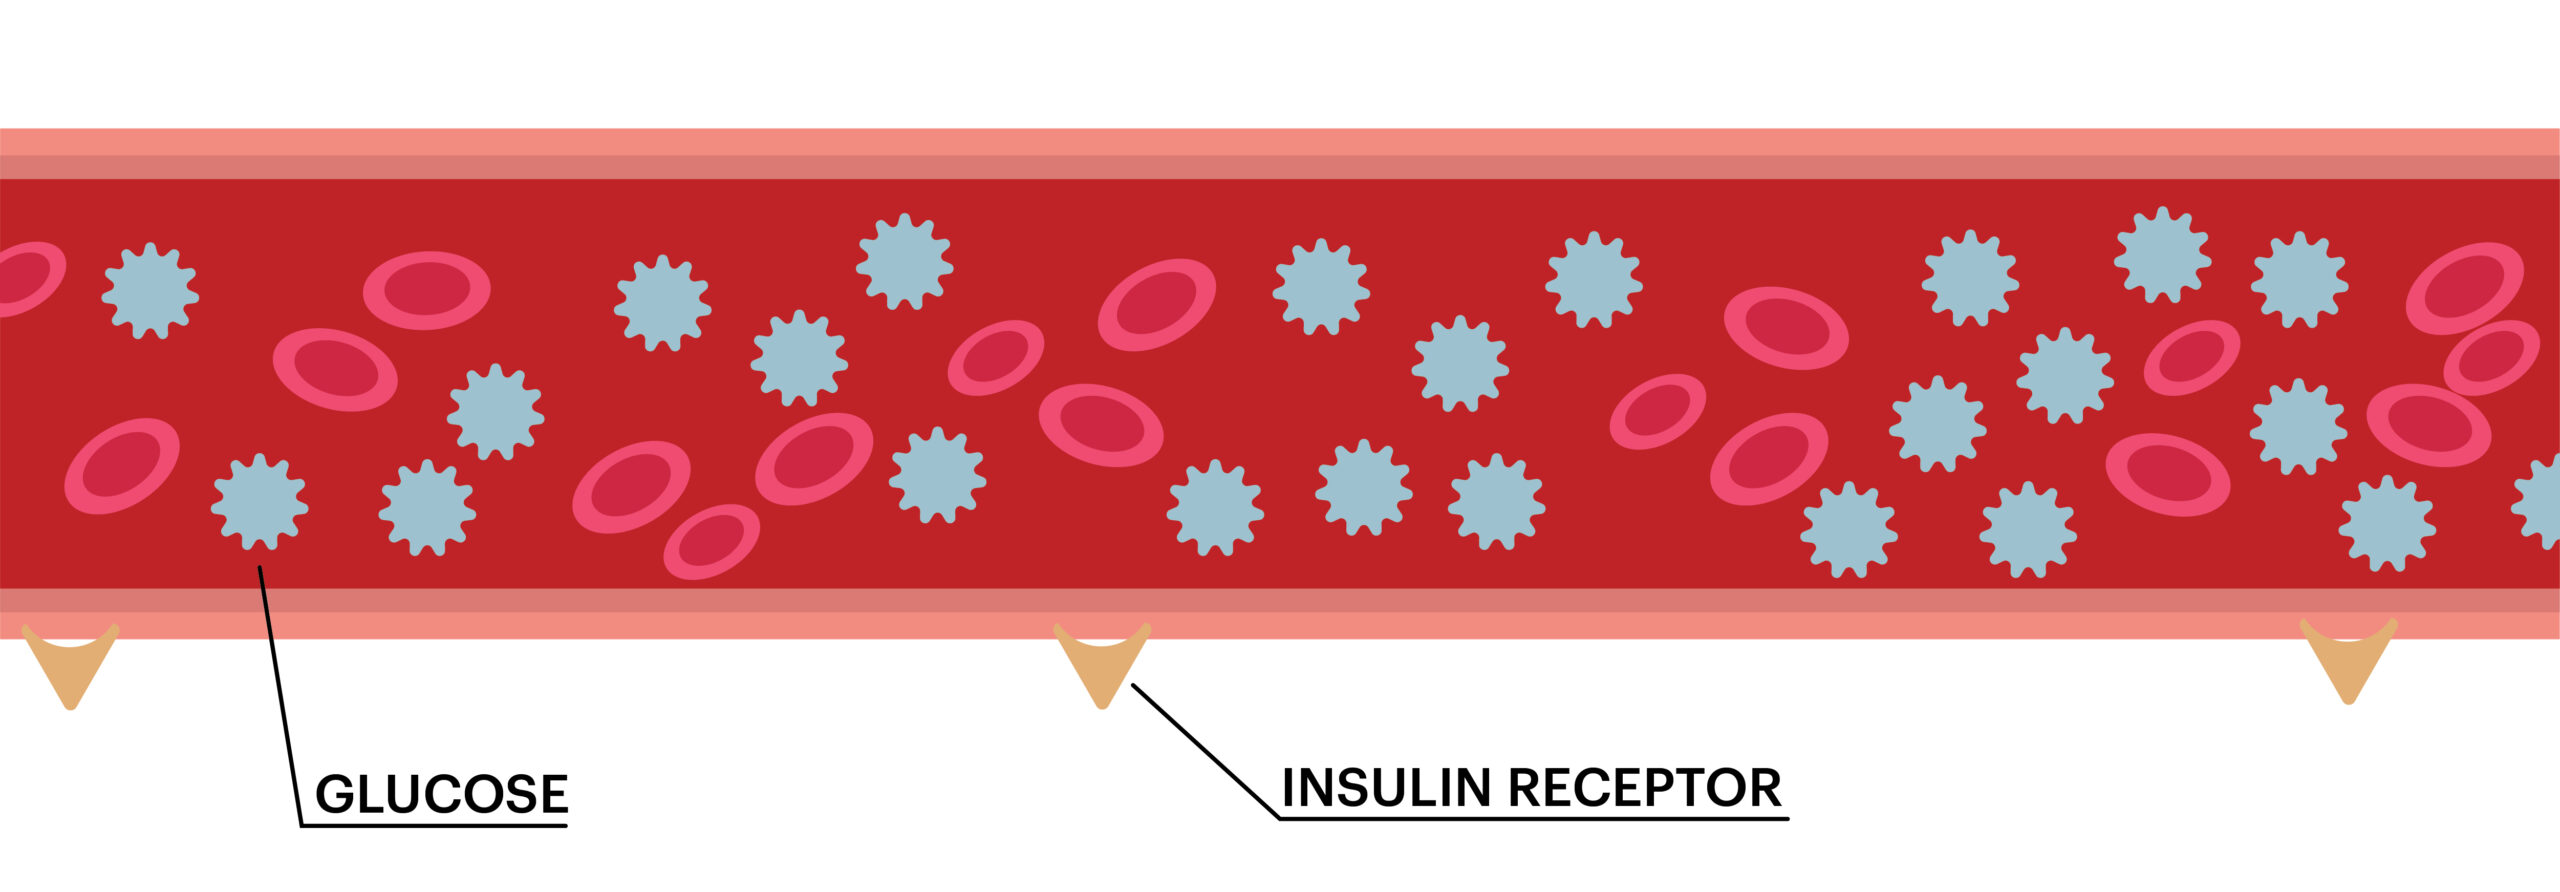 An image of a blood vessel with glucose and insulin receptors